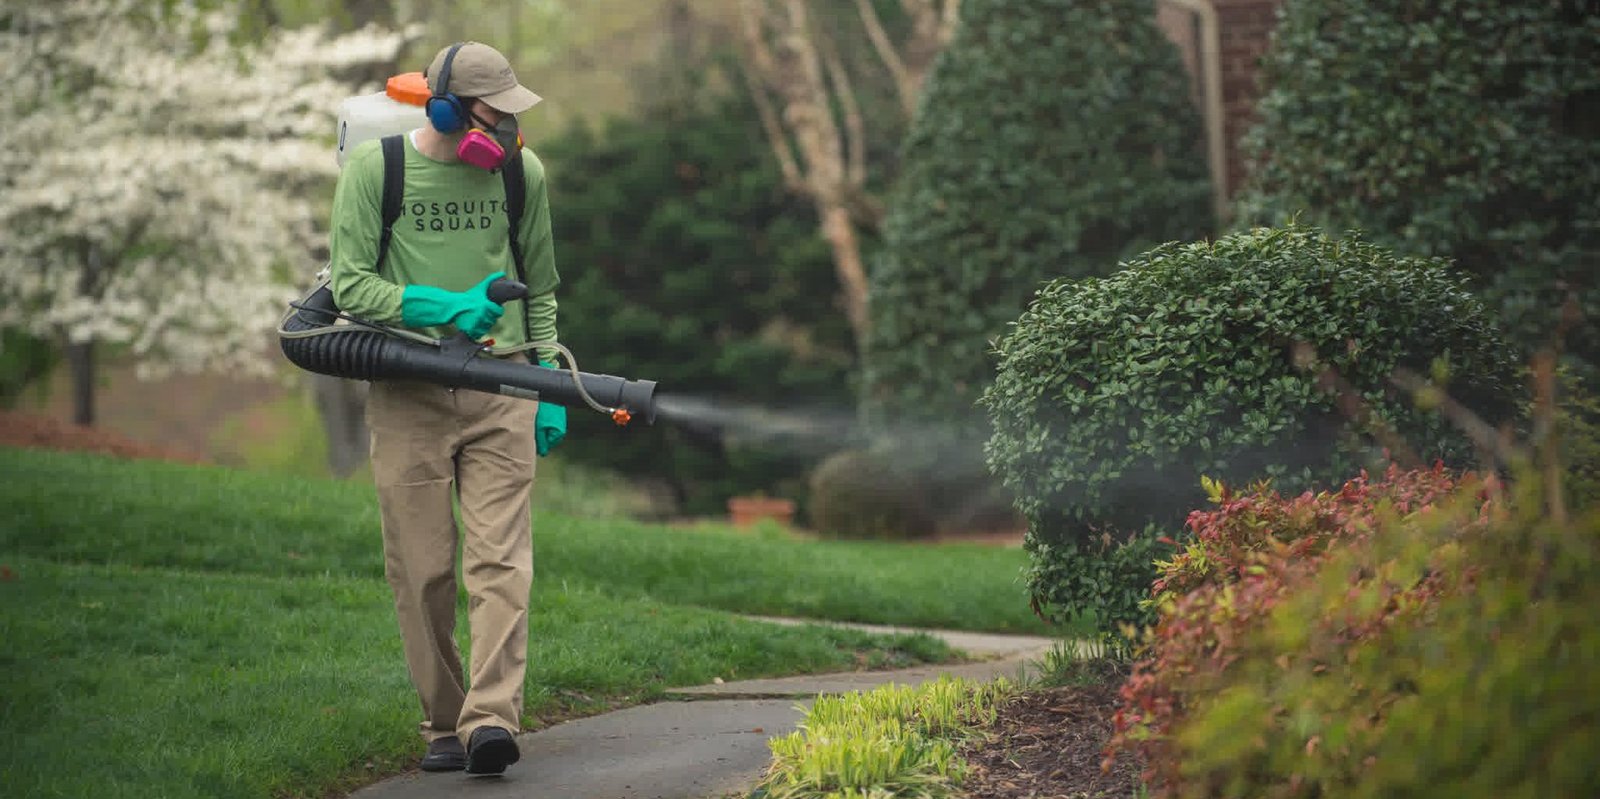 Don’t Let Mosquitoes ruin your Summer- Get Mosquito Spraying from the Pros!